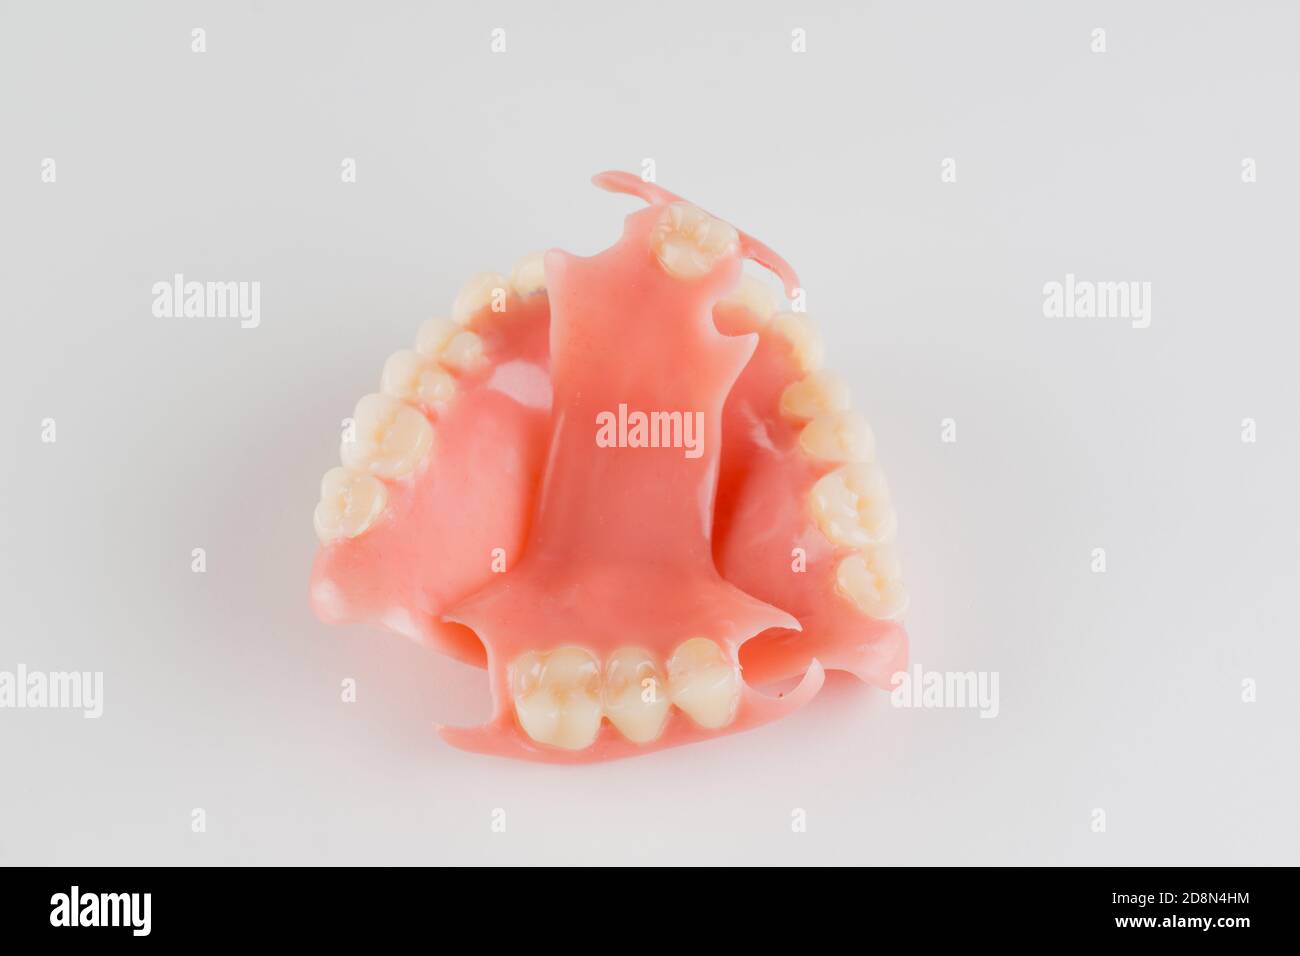 large image of a modern denture nylone on a white background Stock Photo